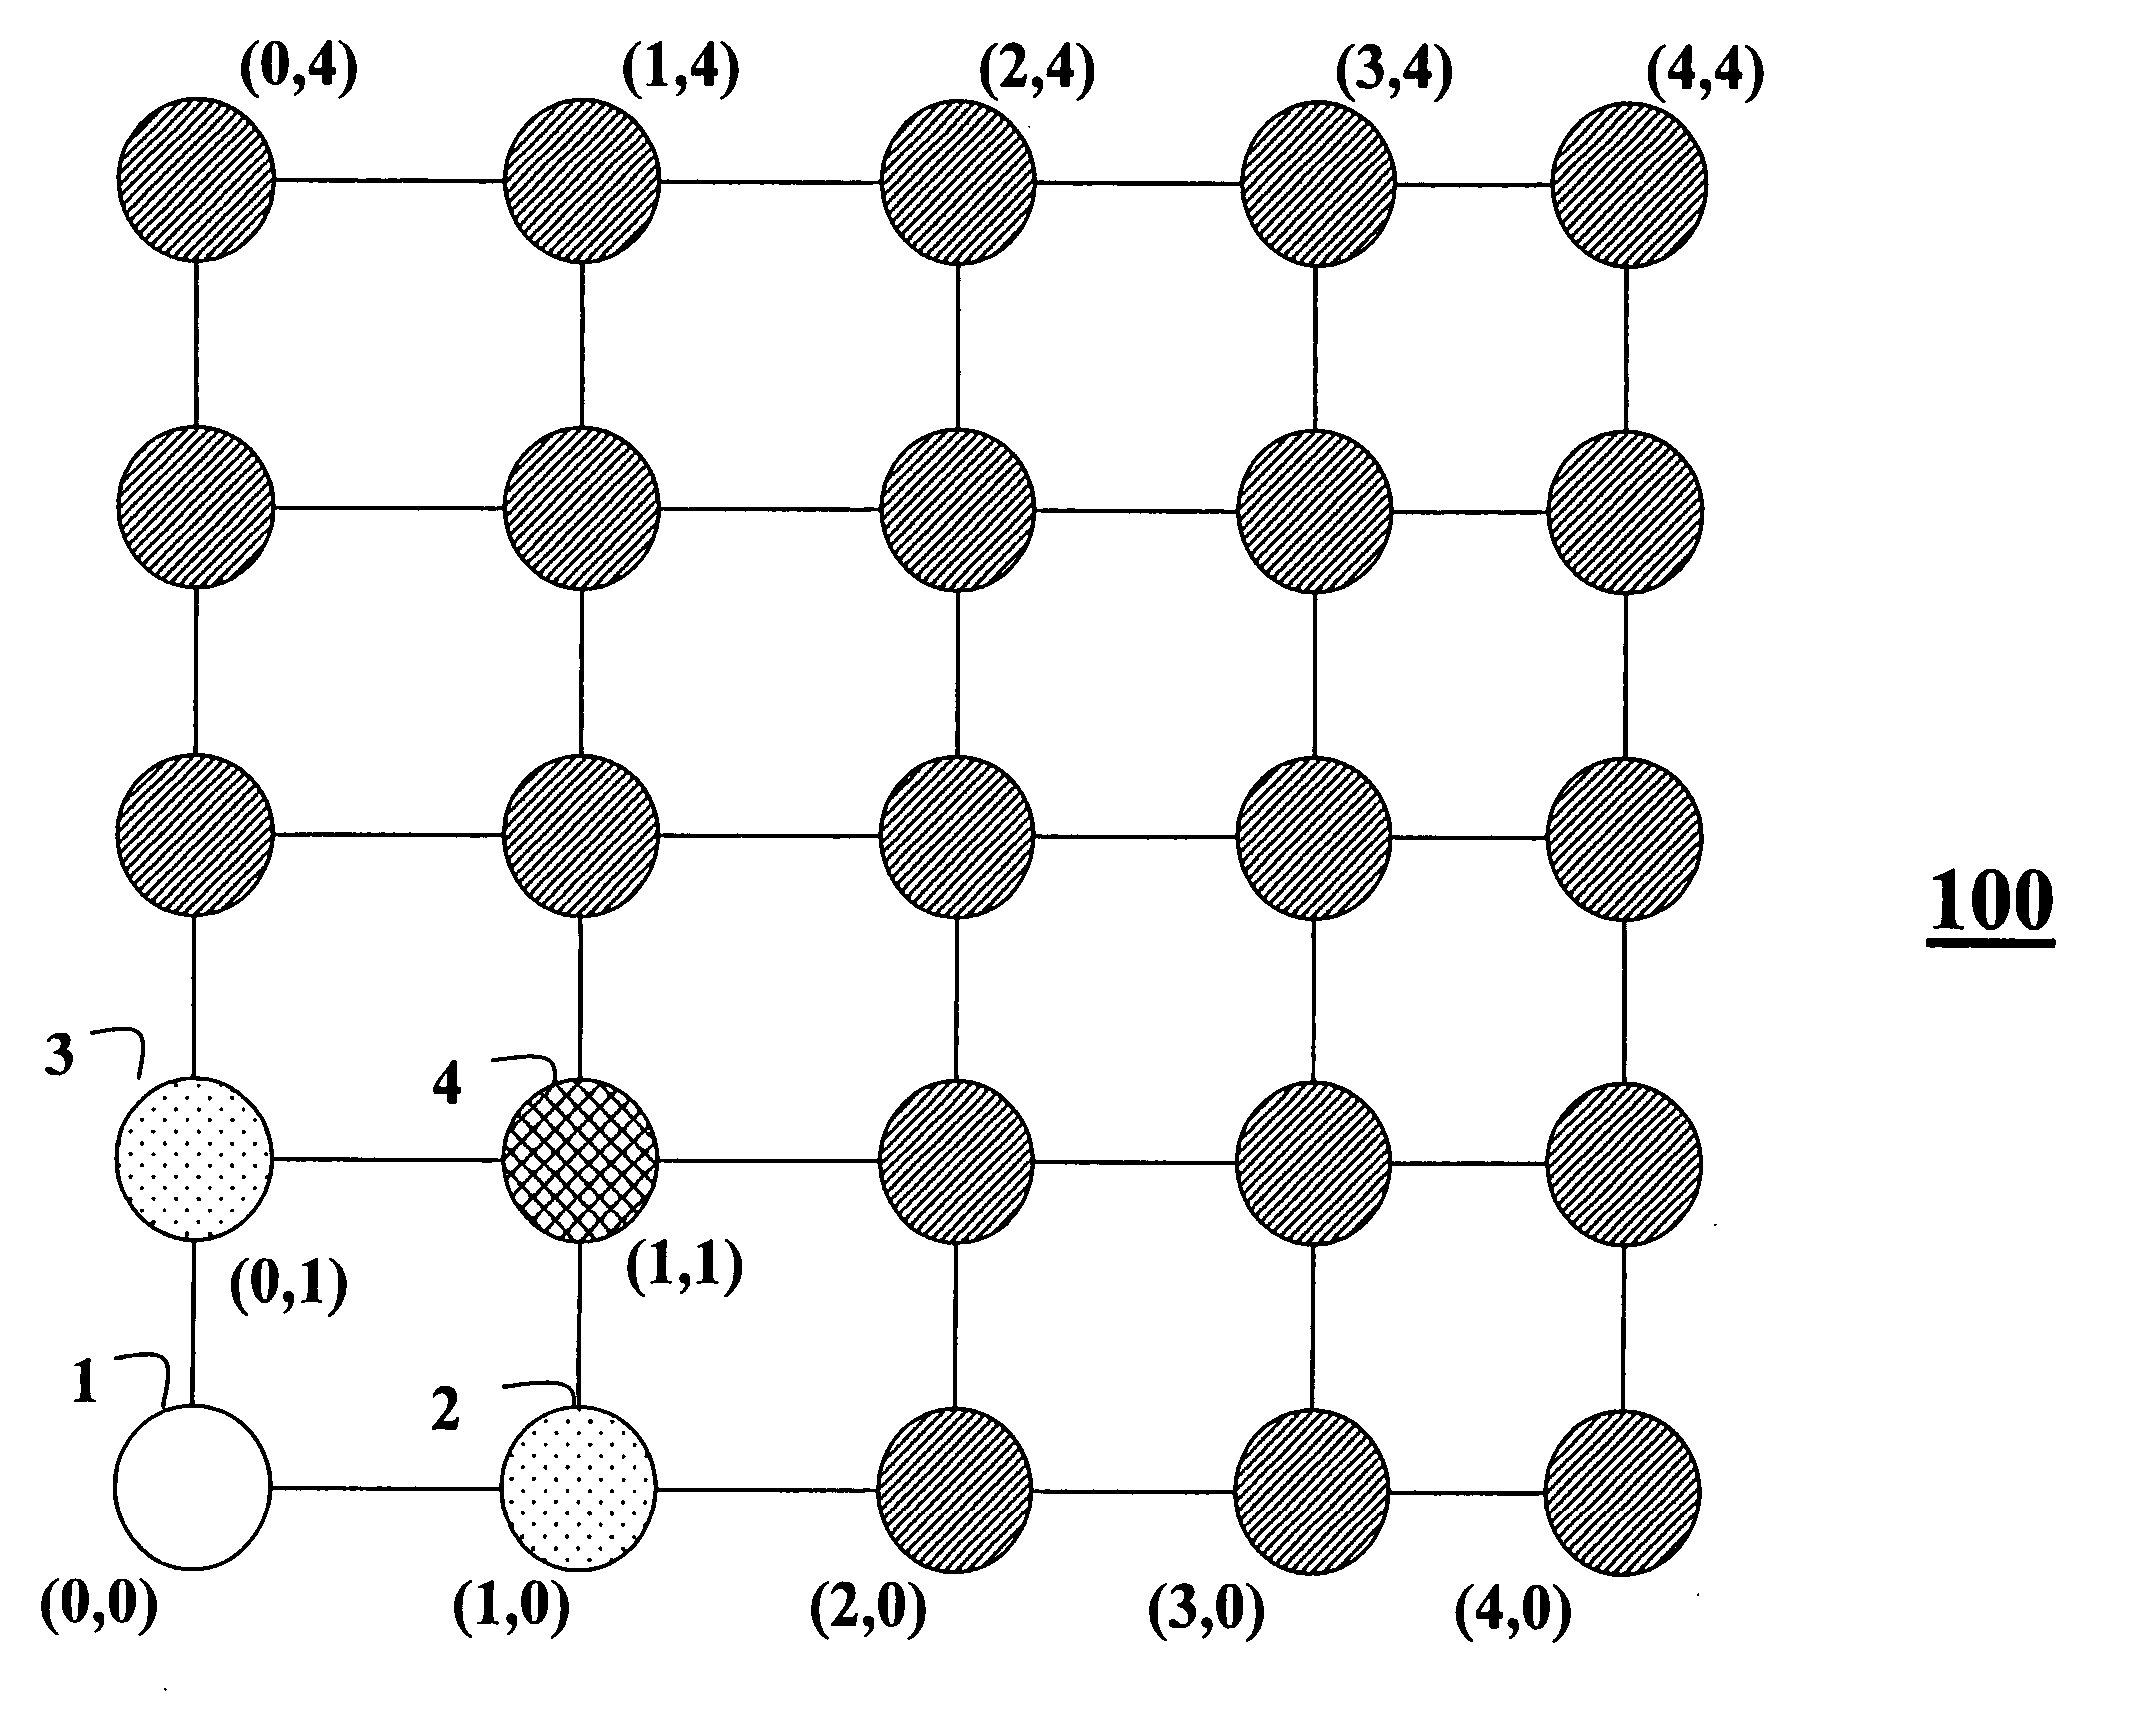 Method for defining, allocating and assigning addresses in ad hoc wireless networks